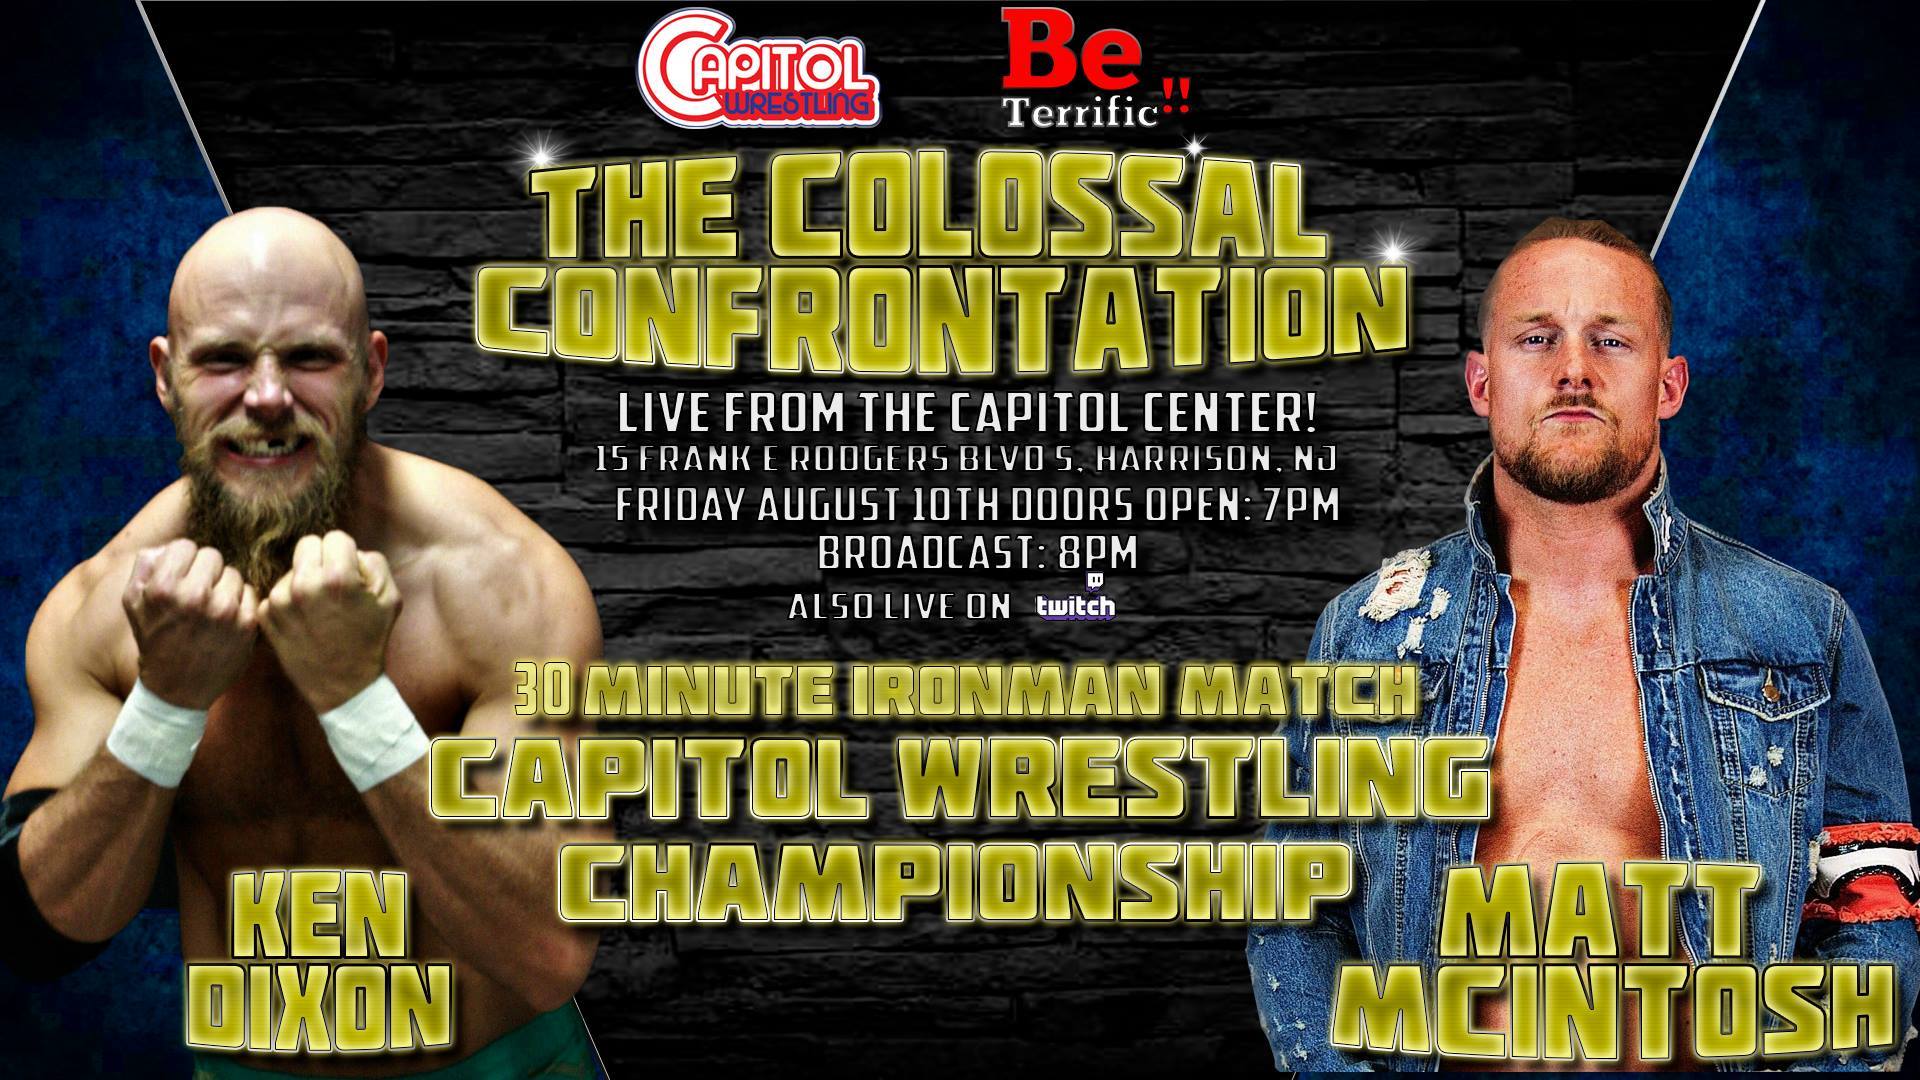 Capitol Wrestling's Colossal Confrontation